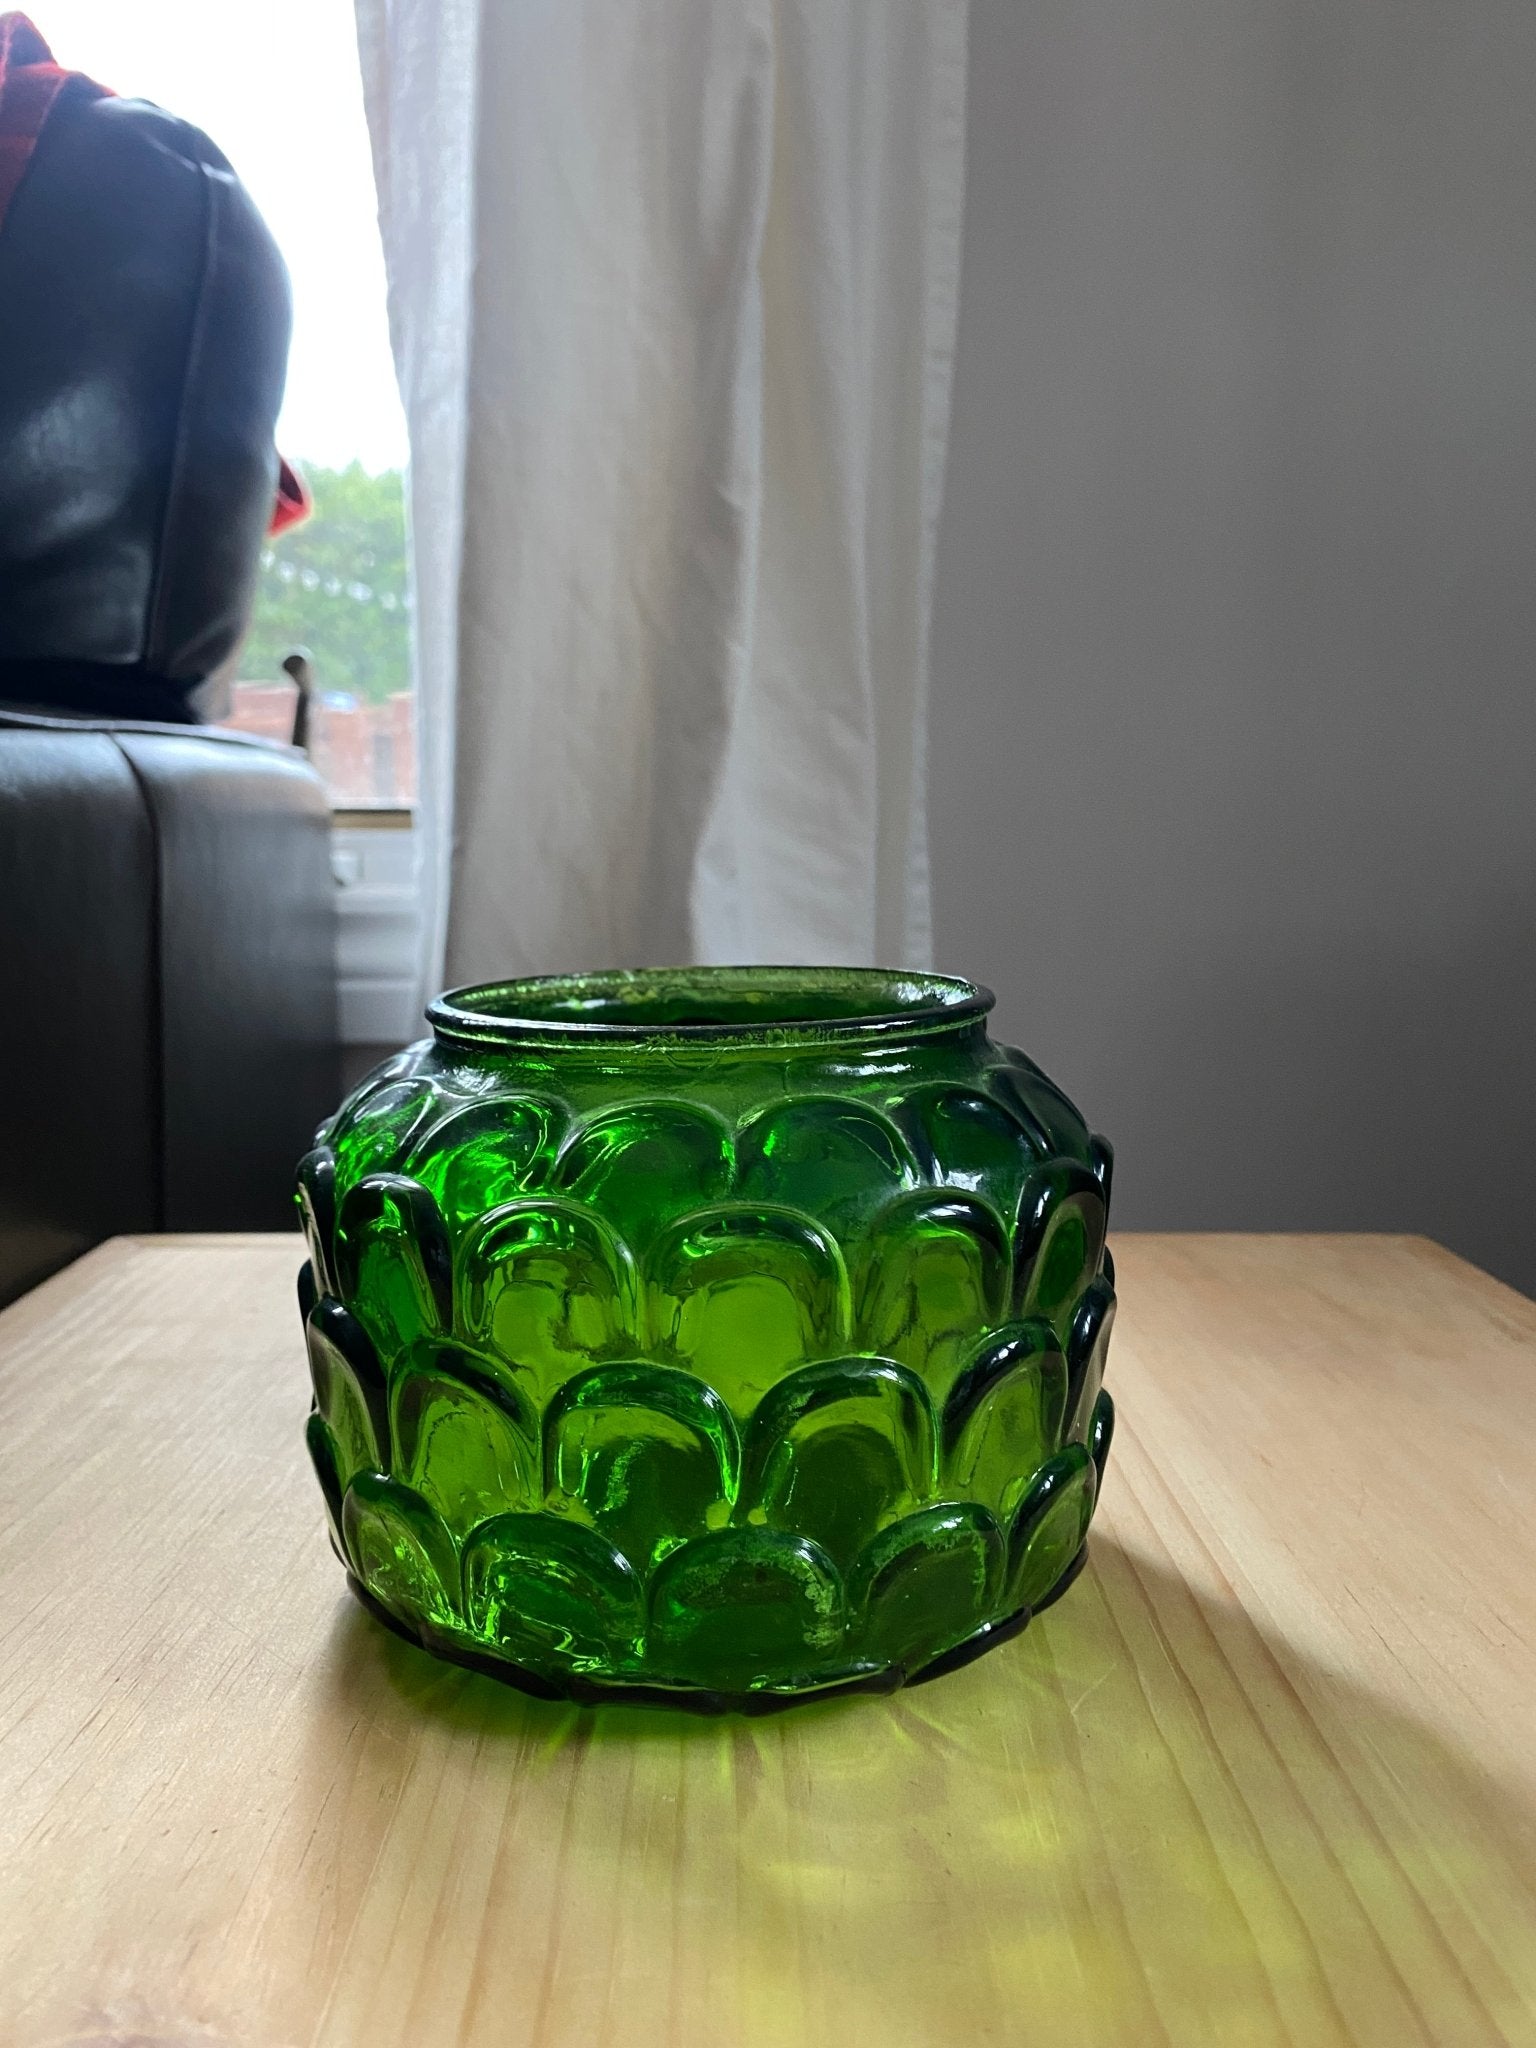 Vintage Emerald Green Glass Bowl by E. O. Brody Vase with Large Fish Scale Pattern - Perth Market